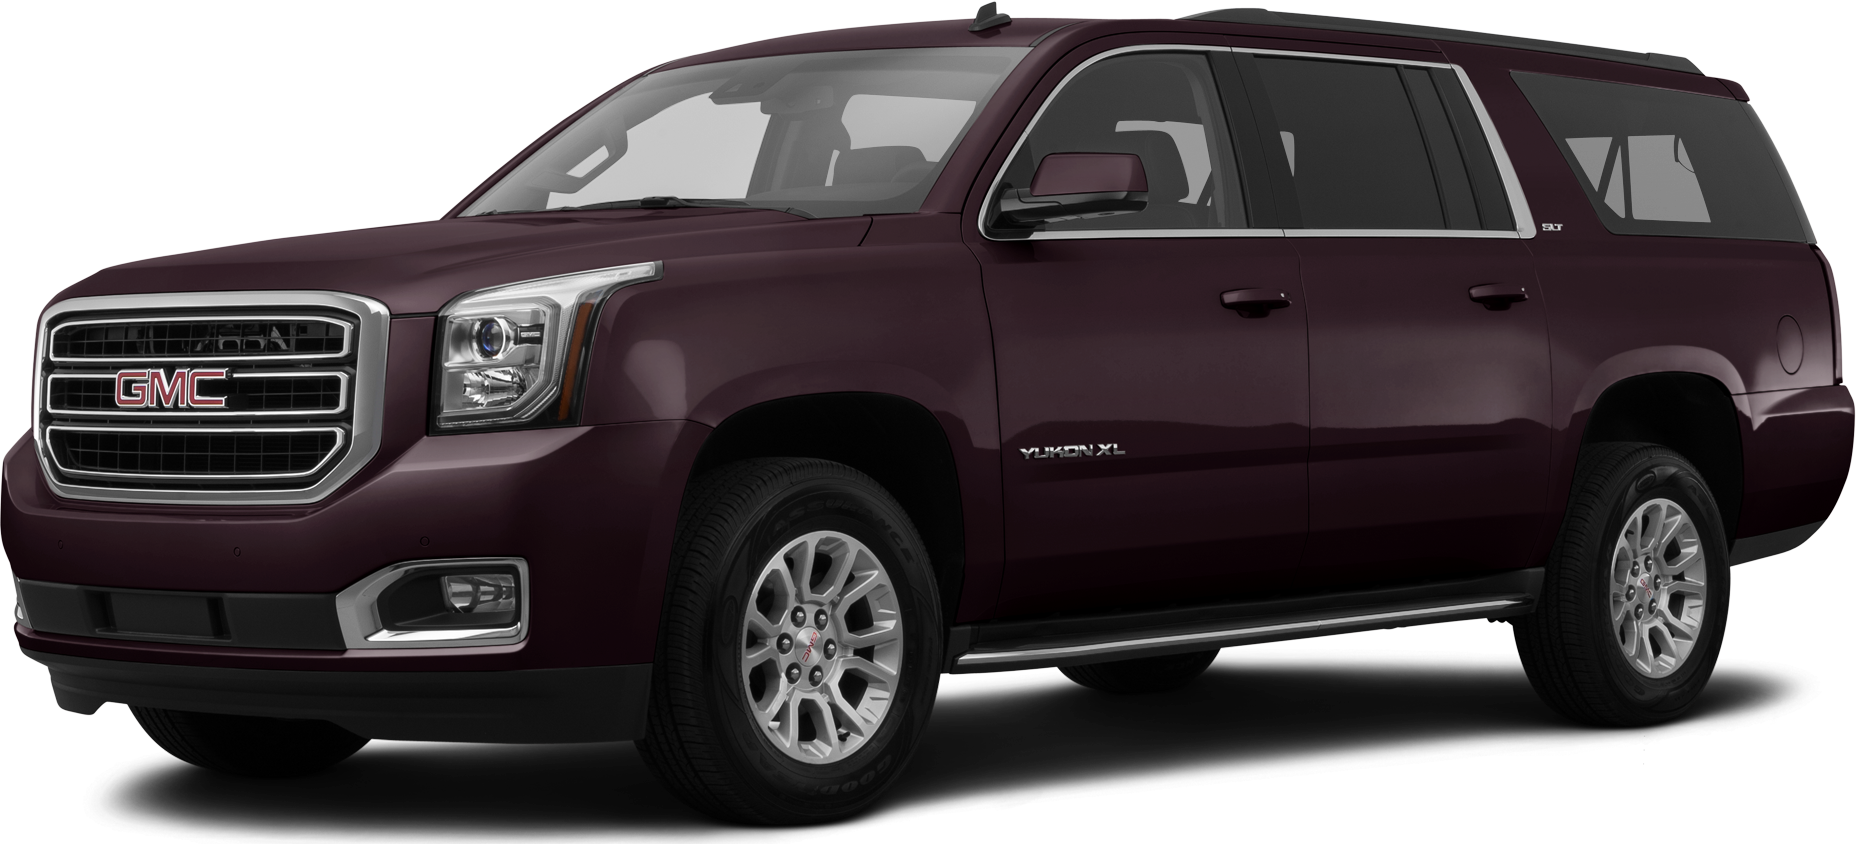 2015 Gmc Yukon Xl Price Value Ratings And Reviews Kelley Blue Book 2774